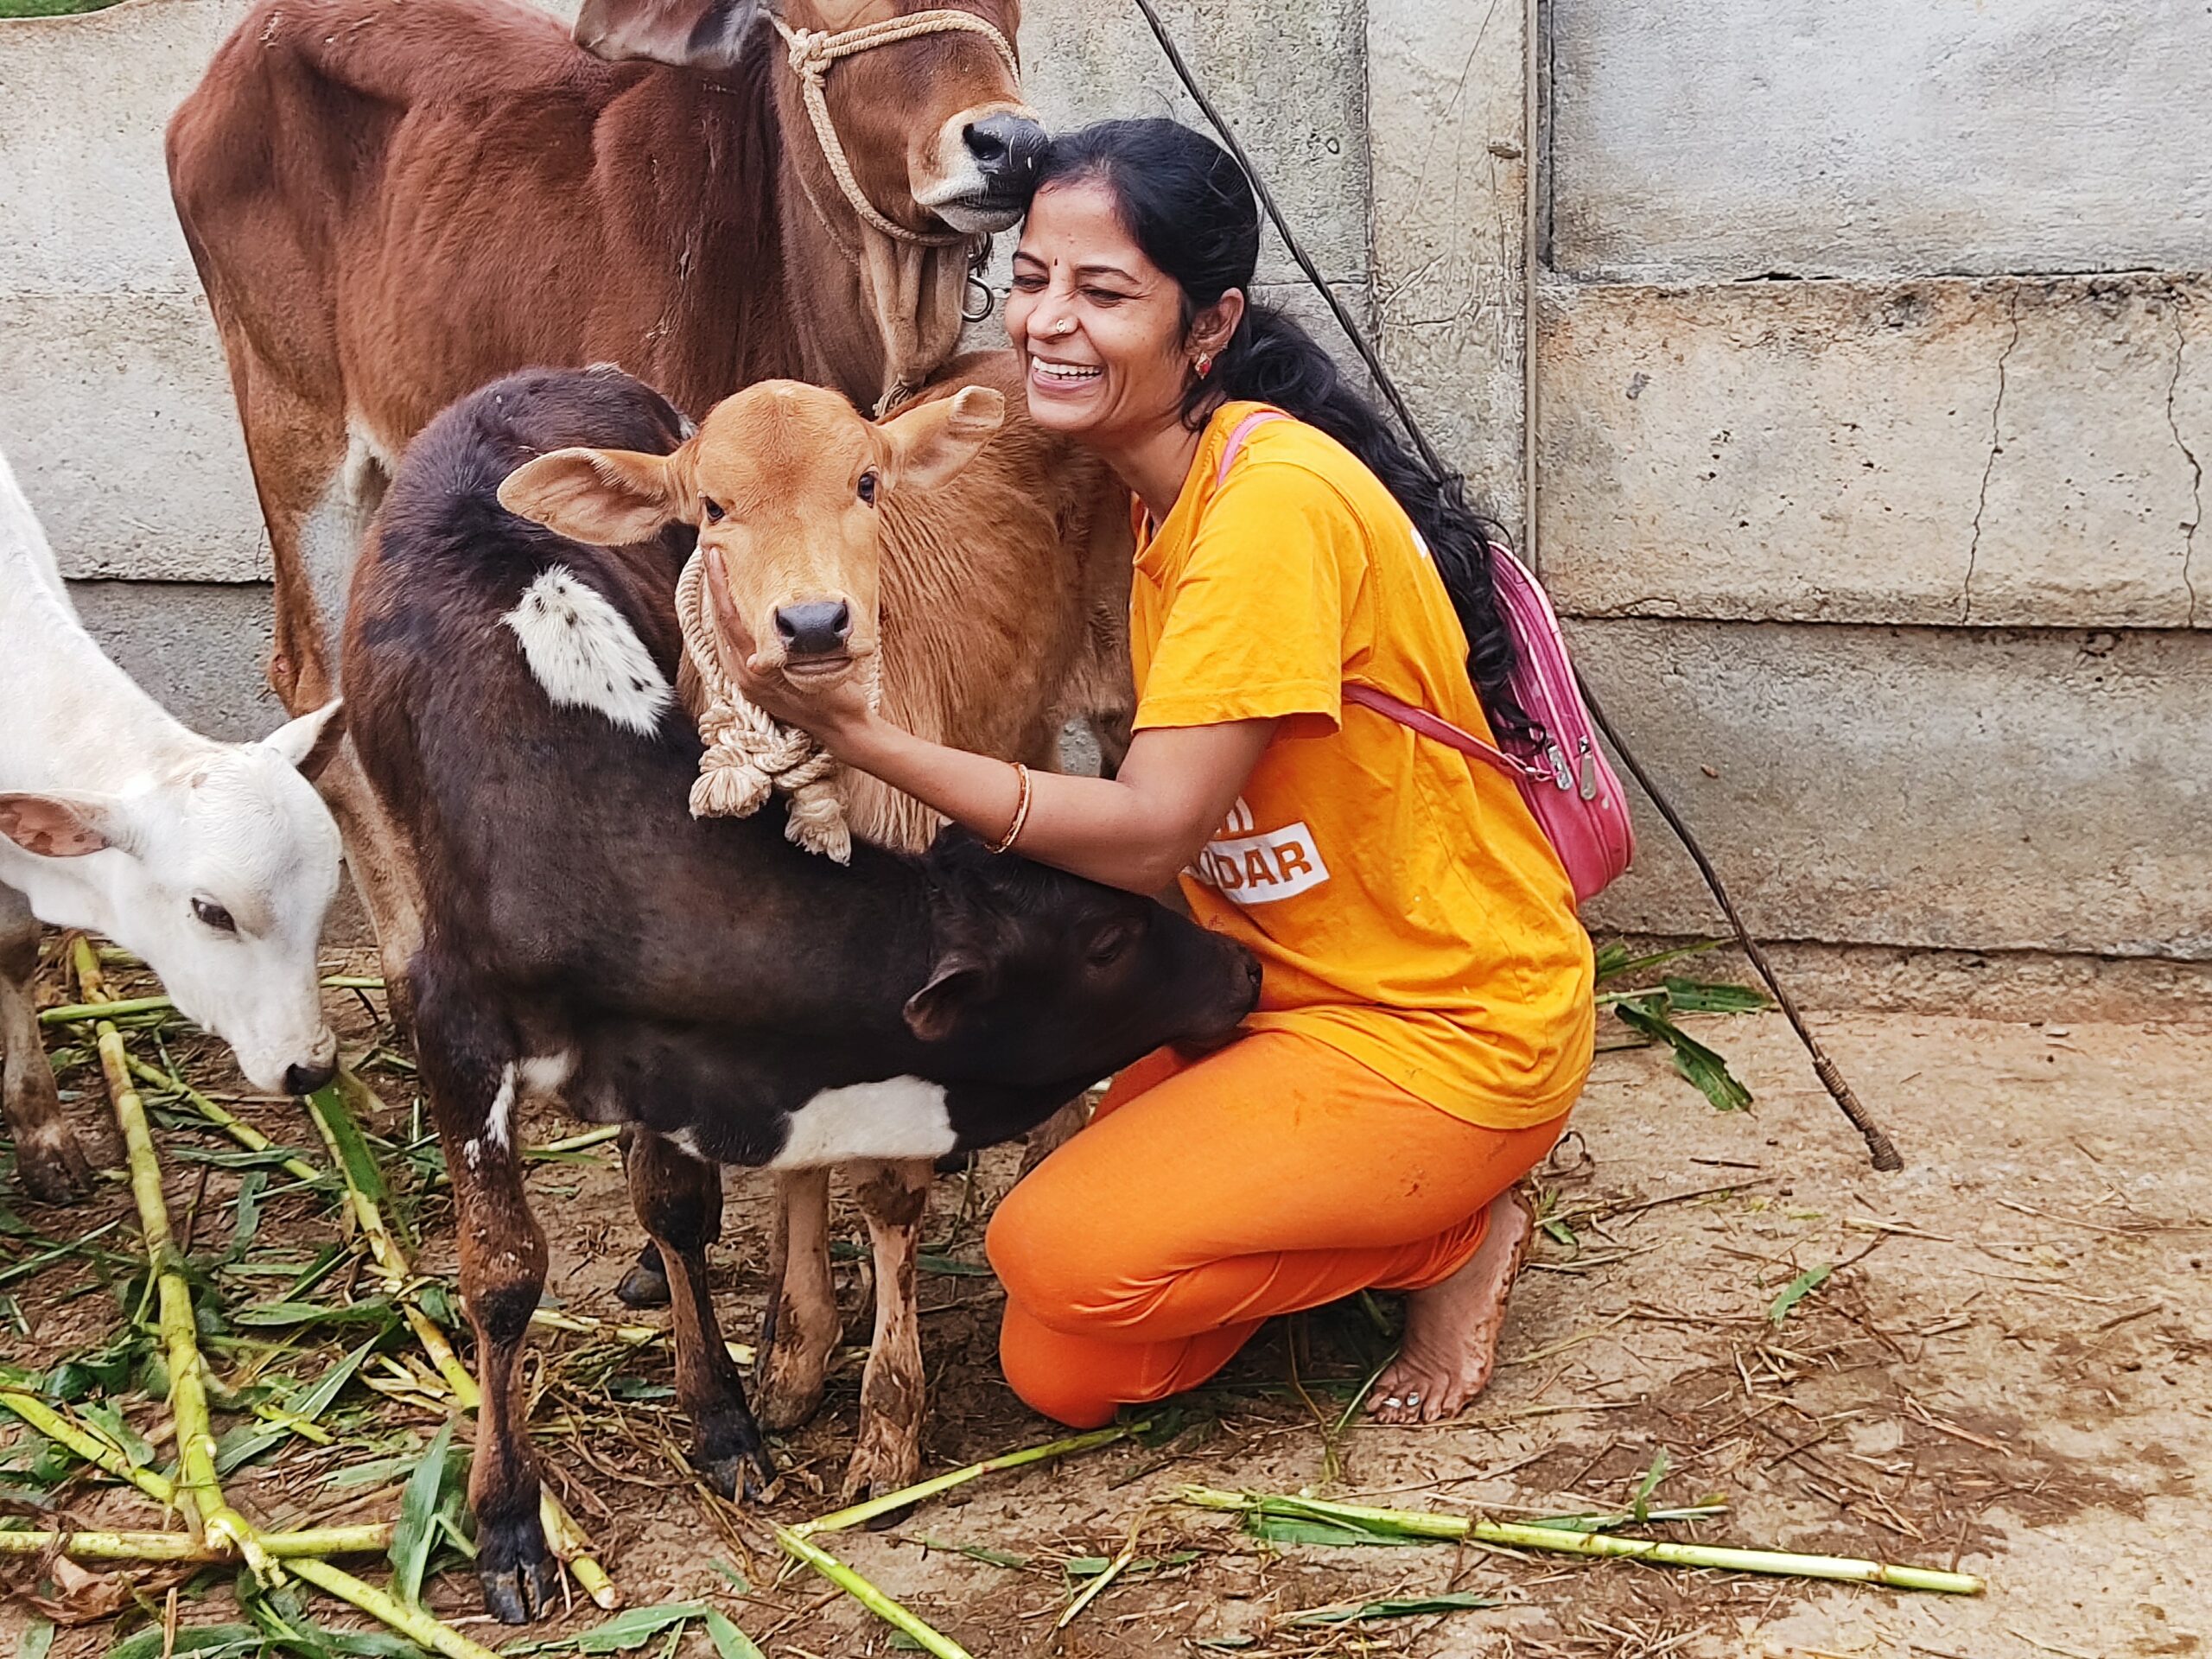 A GoPals woman volunteer celebrates National Cow Day by joyfully hugging calves.